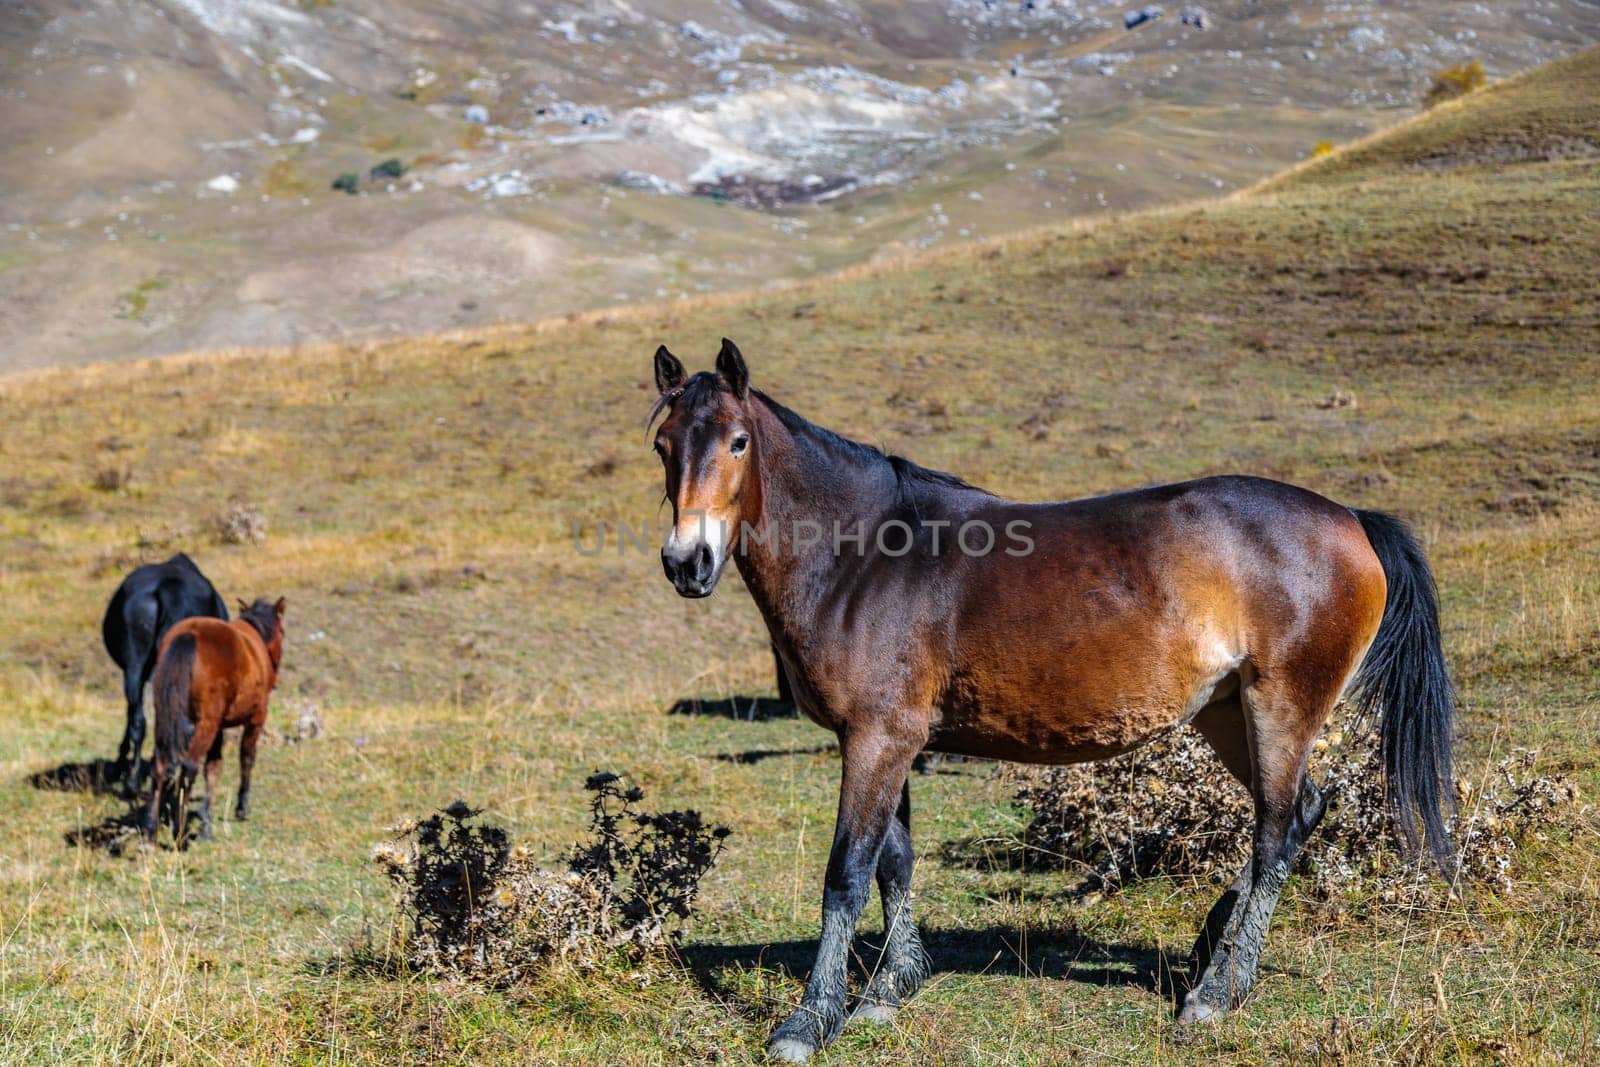 Wild horses in the mountains delightfully demonstrate the freedom of nature by Yurich32